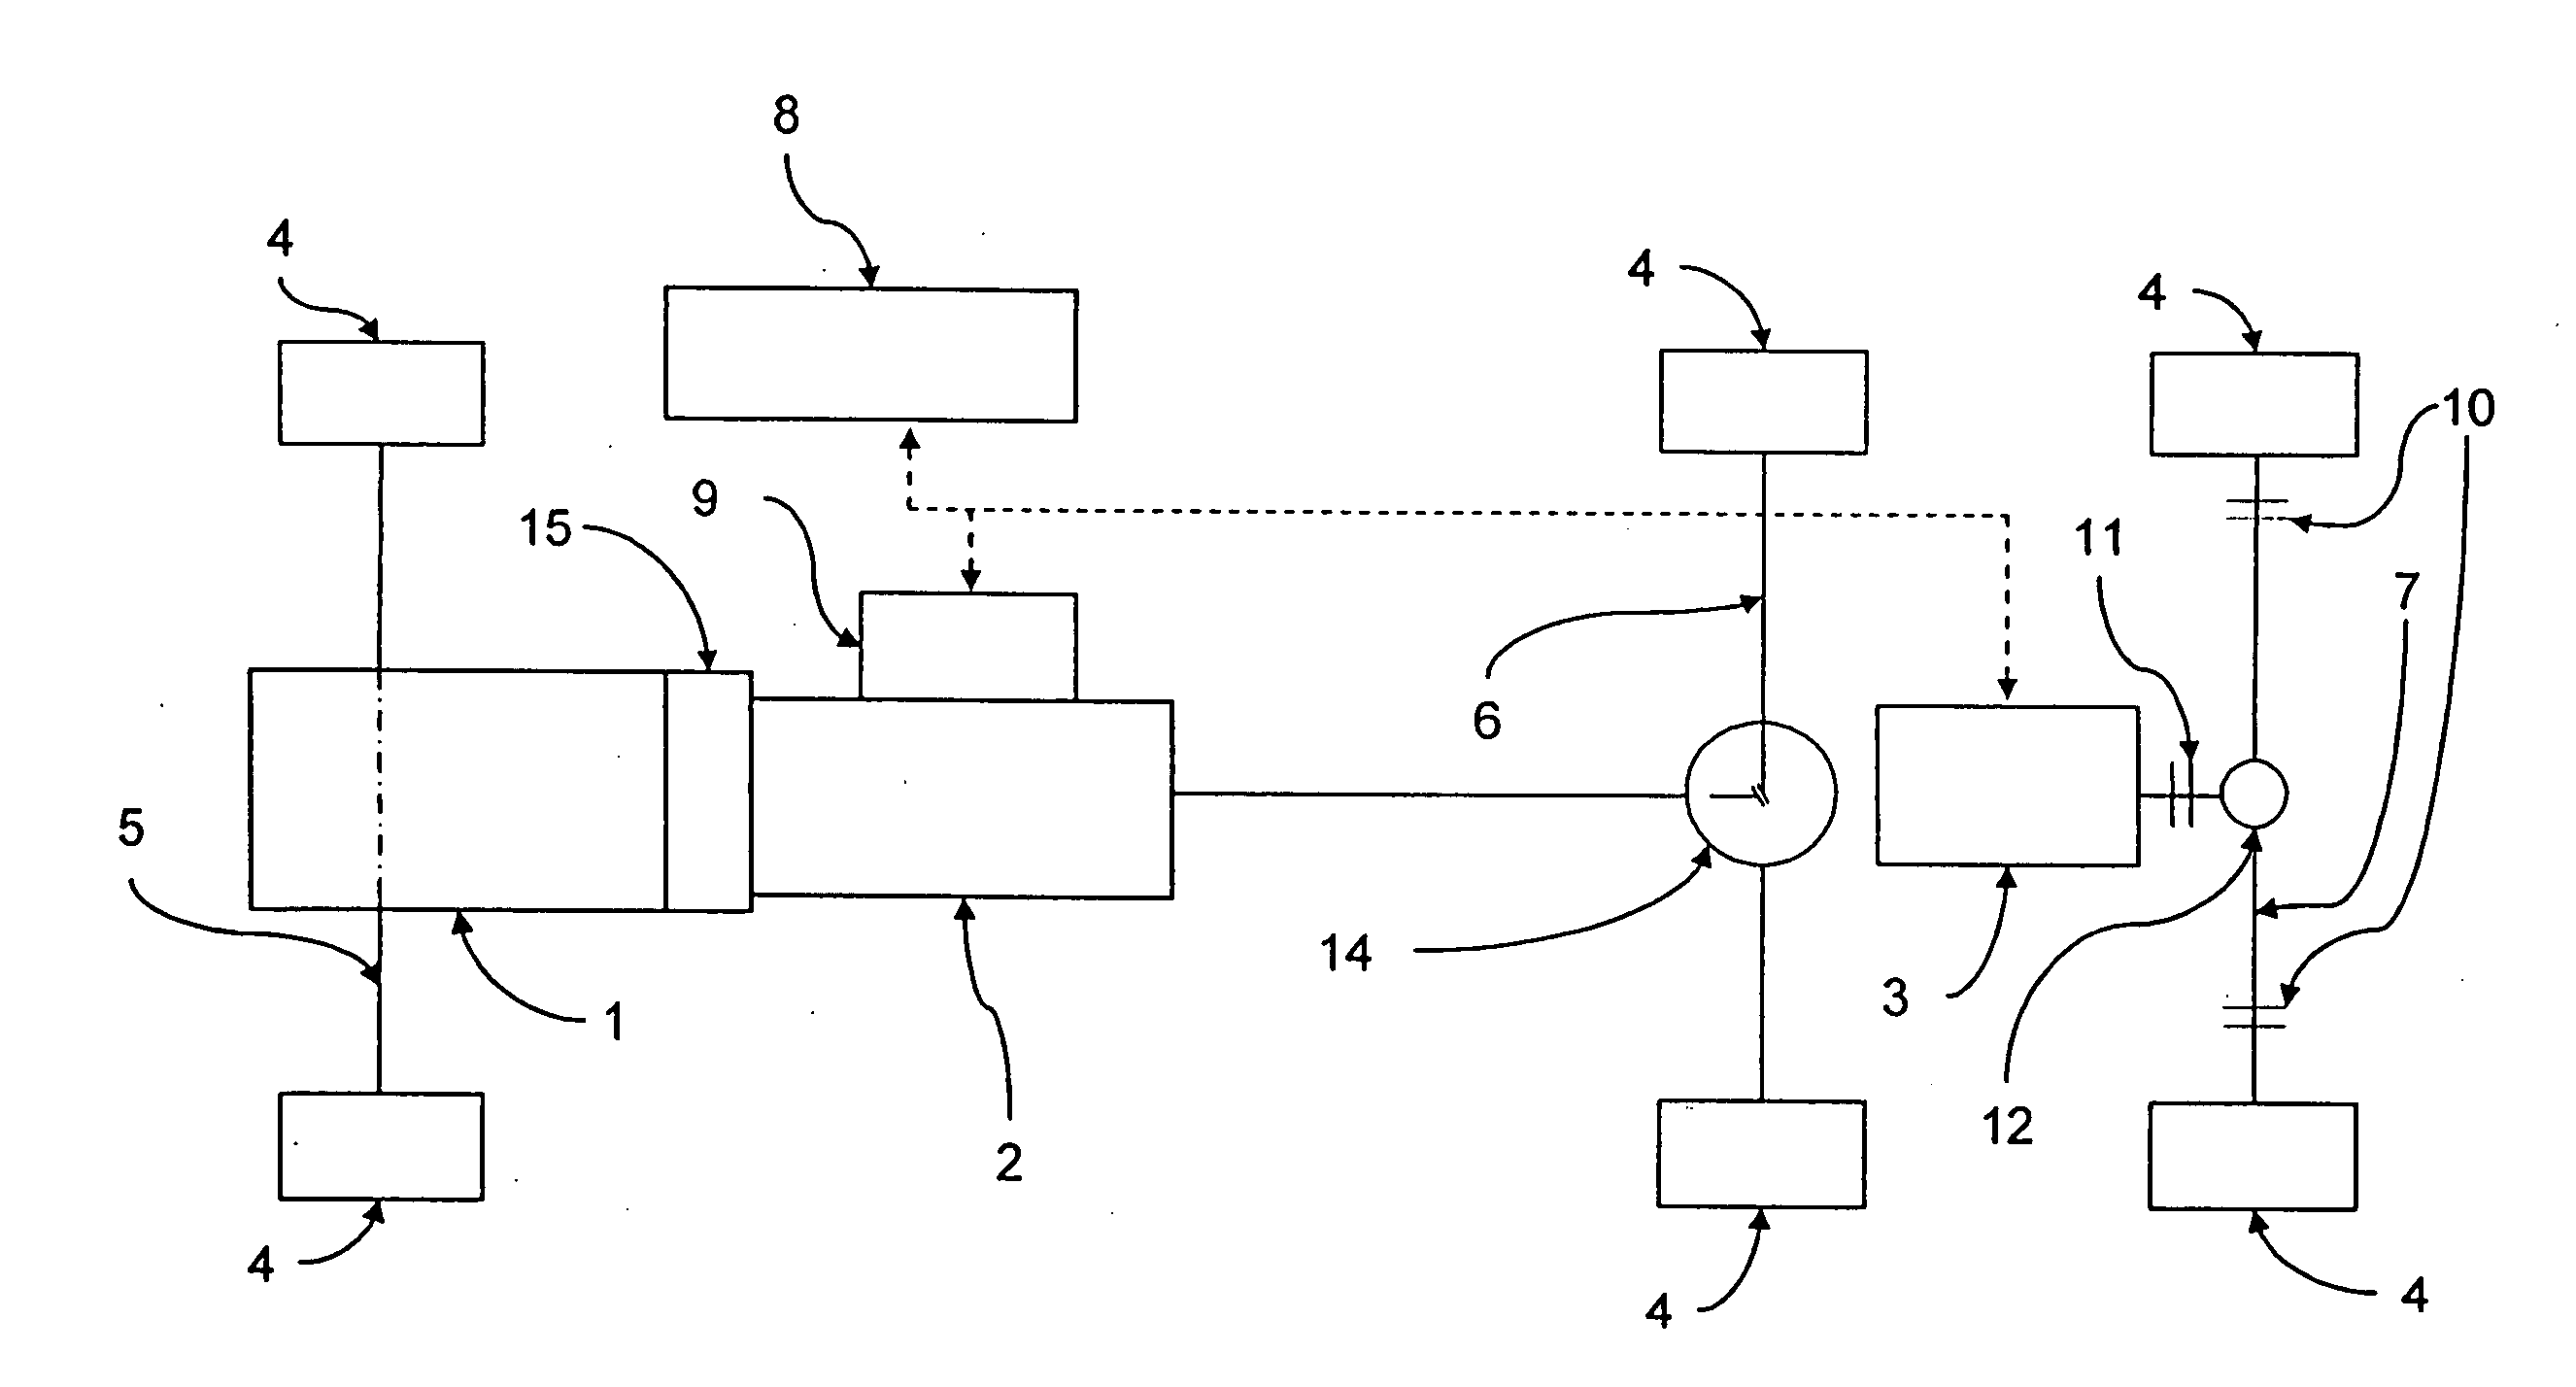 Drive train for a motor vehicle and method of operating a drive train of a motor vehicle